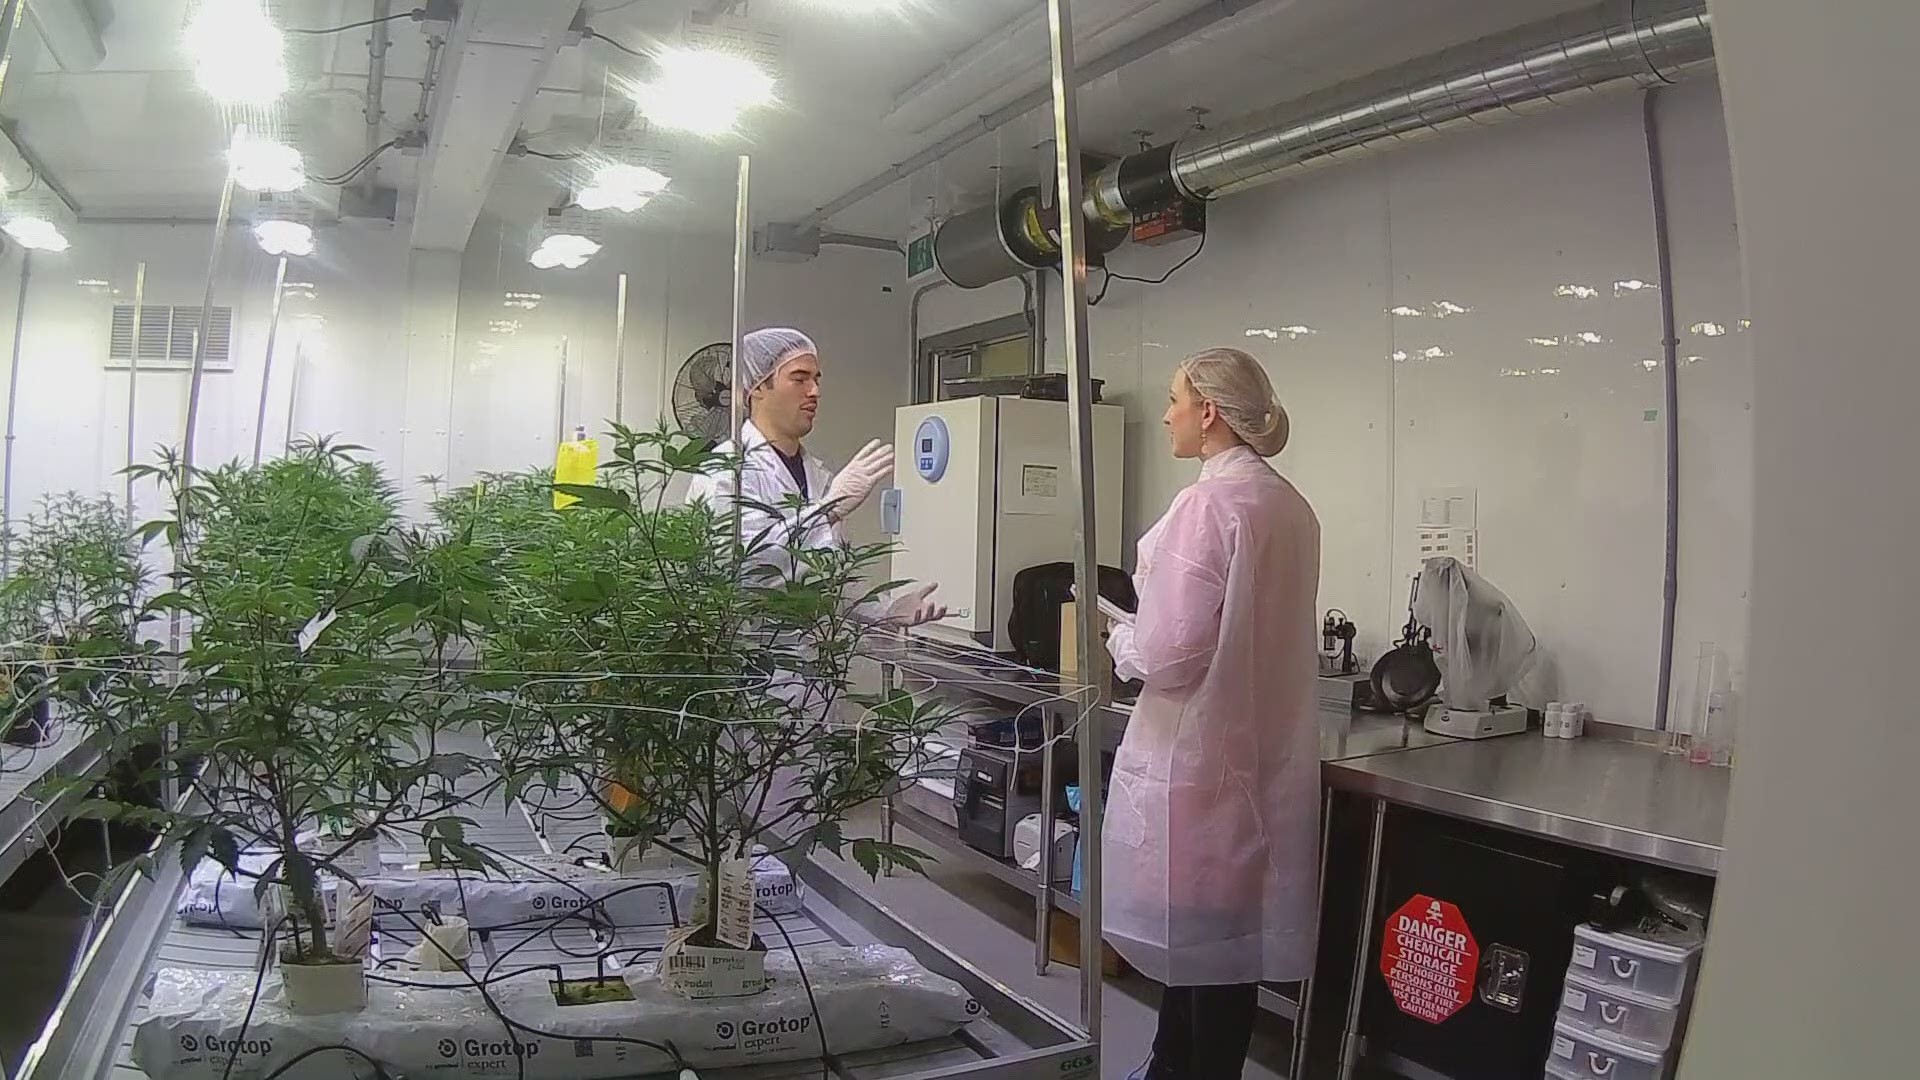 Carson Otto, a student at Niagara College is working to get a Commerical Cannabis Production Graduate certificate.